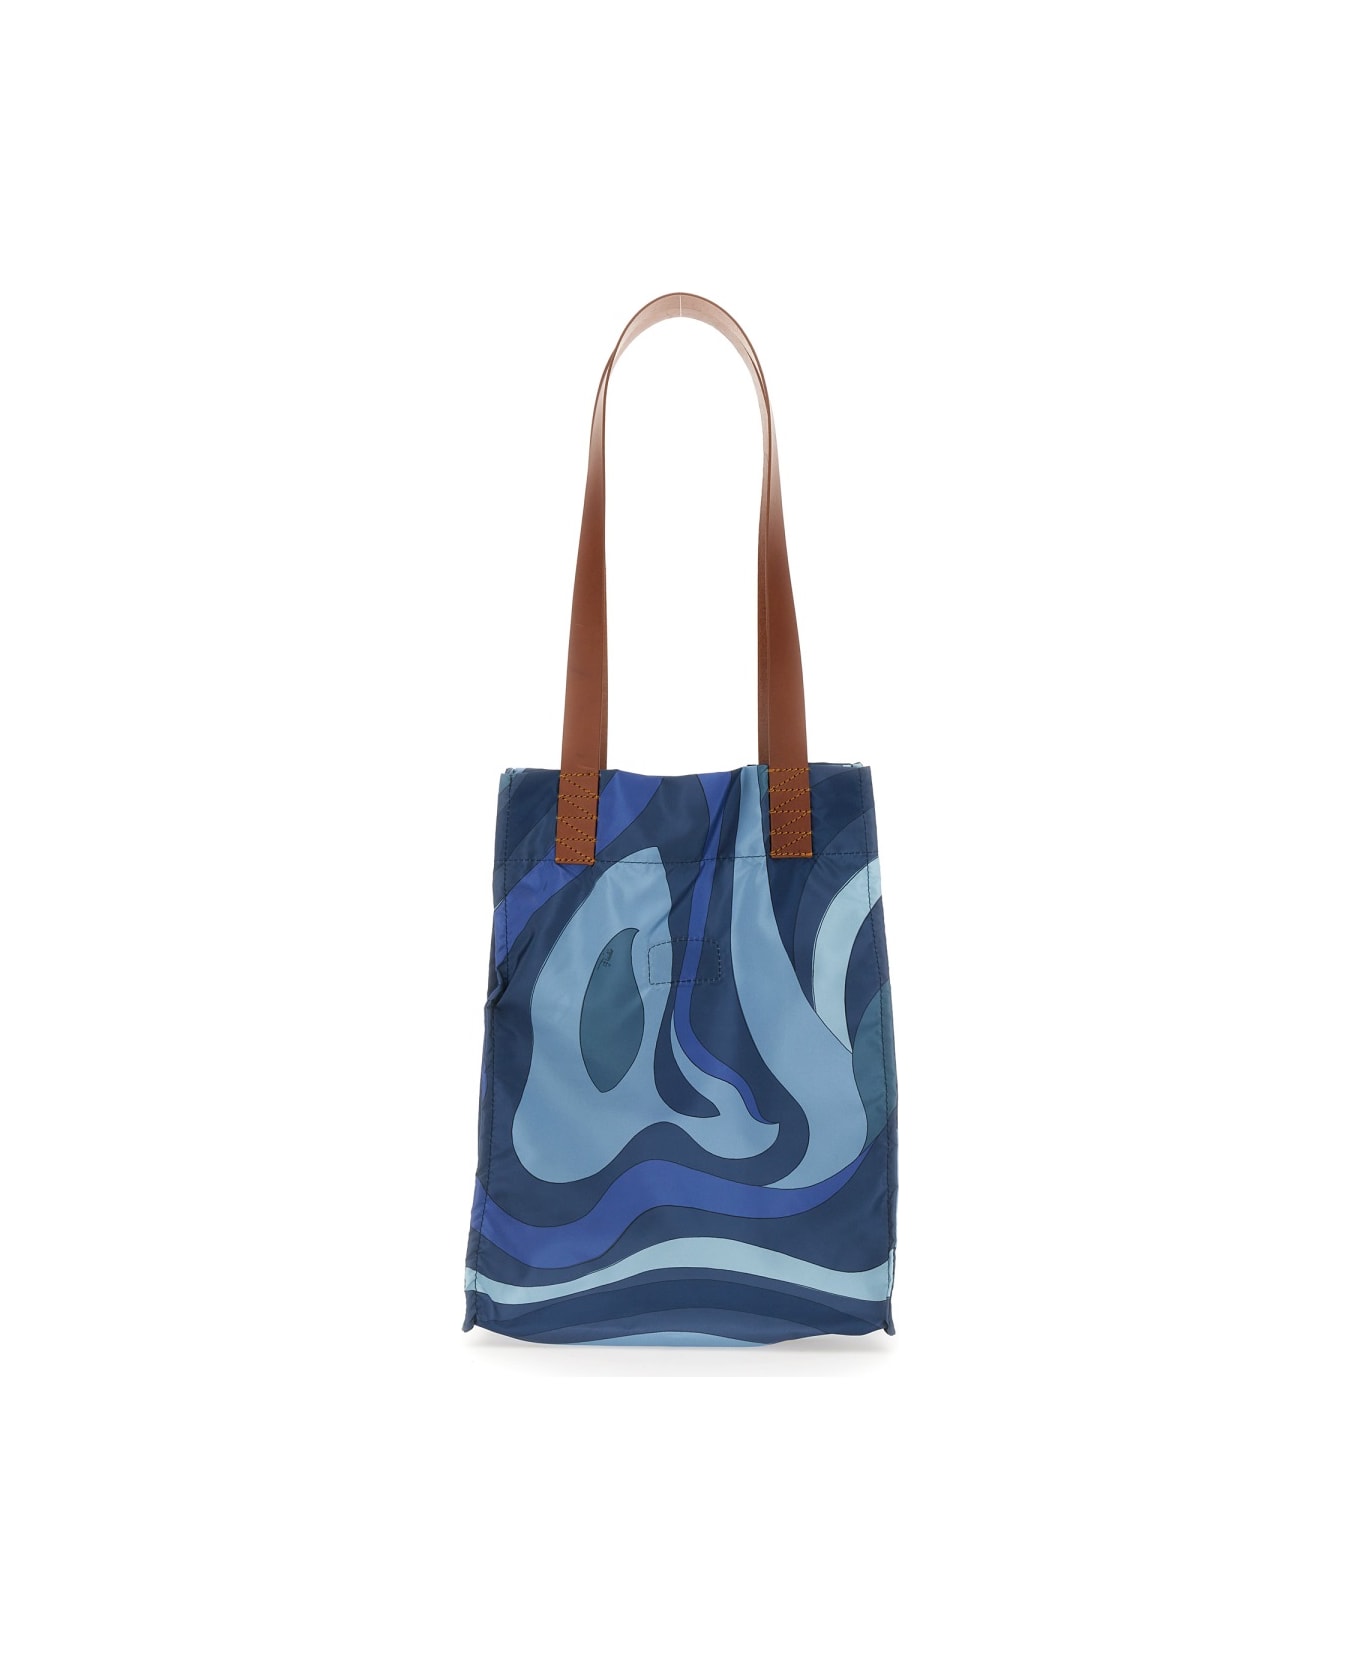 Pucci Patterned Tote Bag - BLUE